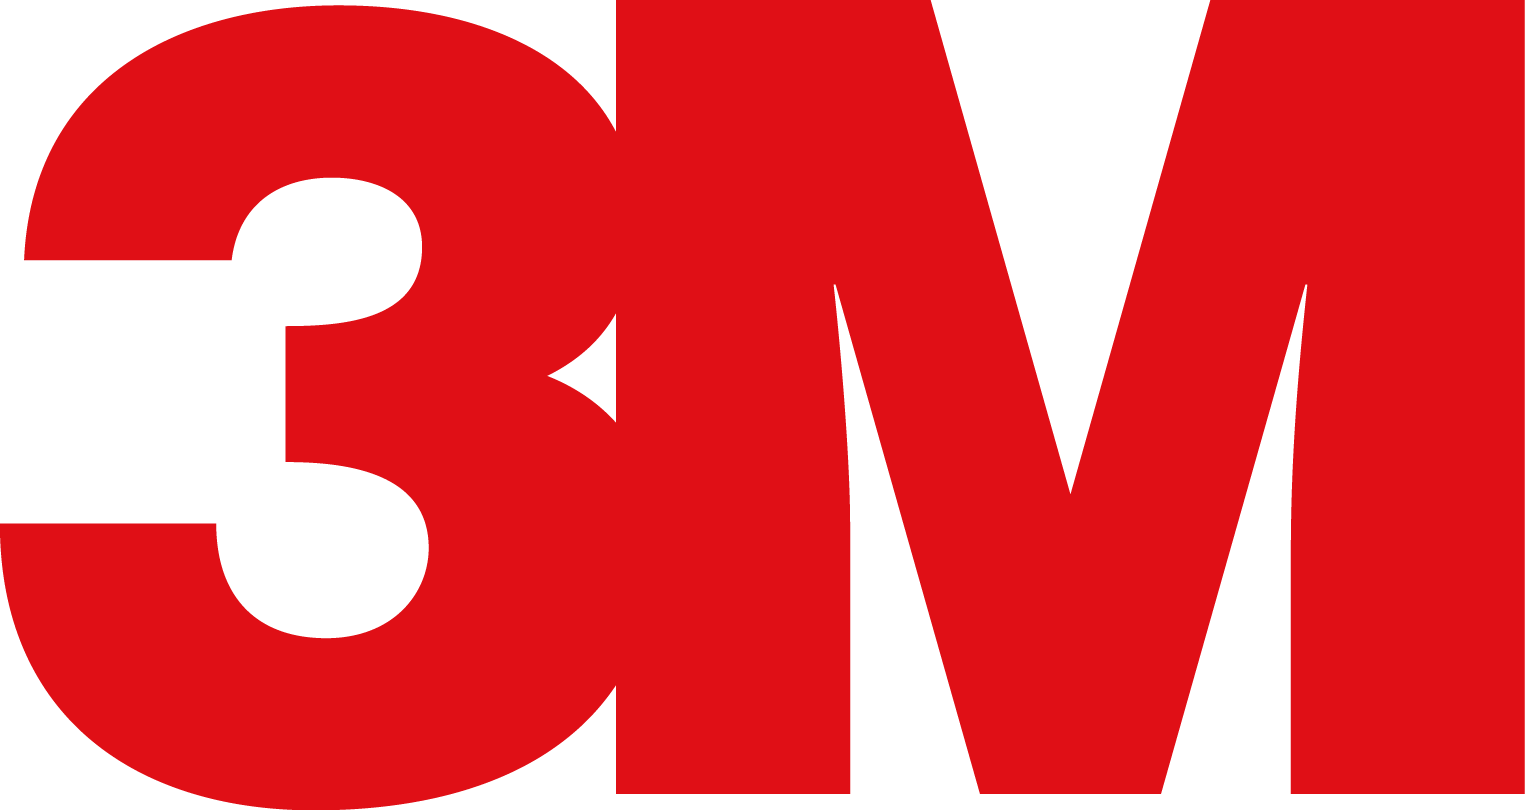 3M Logo [Minnesota Mining and Manufacturing - 3m.com] Download Vector